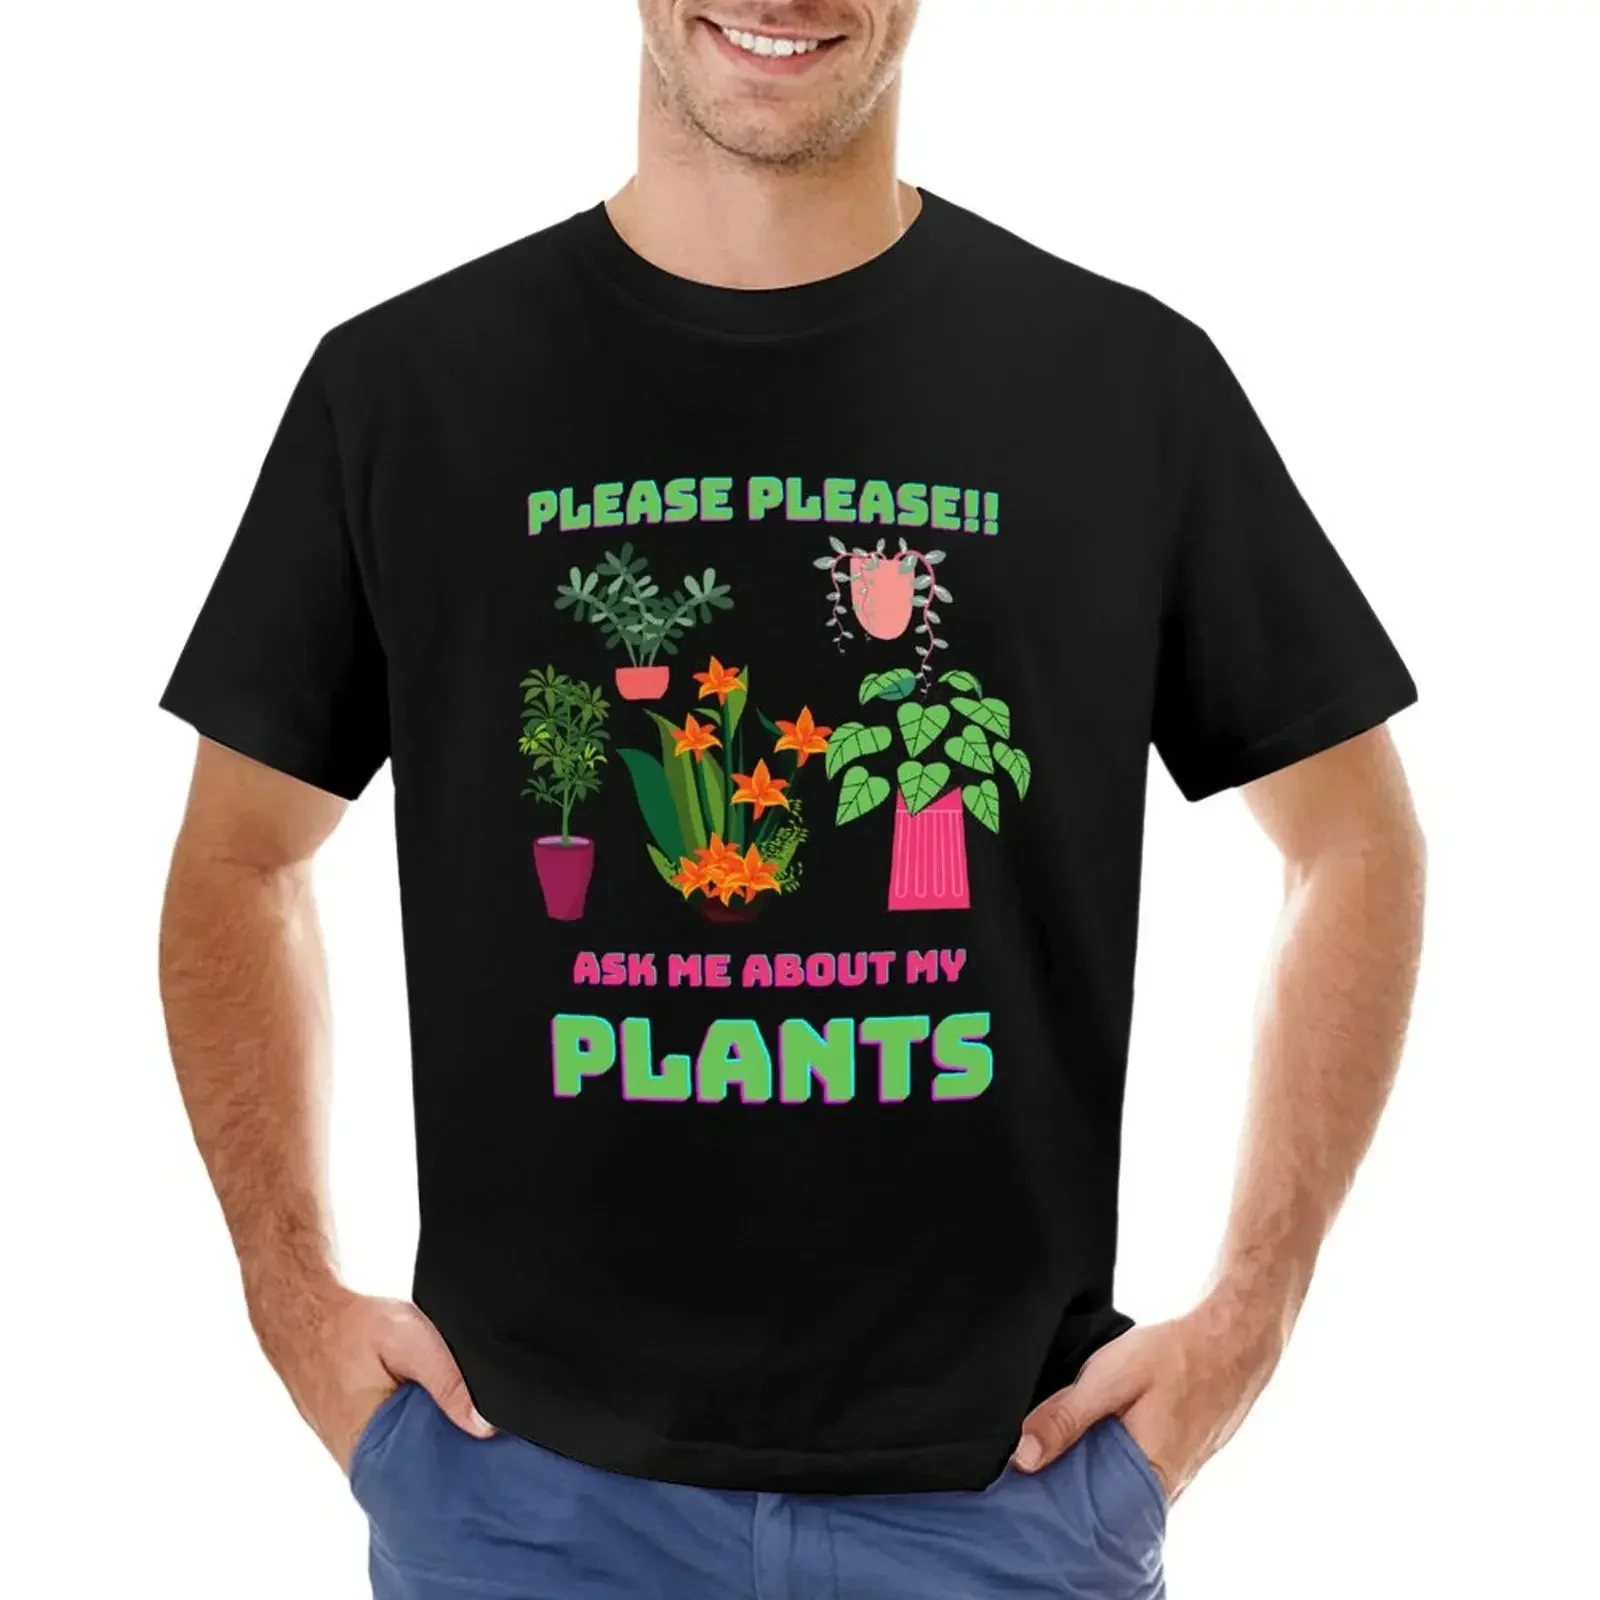 

Ask me about my about, me, my, plant, ask, me, about, my me, my, my T-shirt oversizeds sweat fruit of the loom mens t shirts